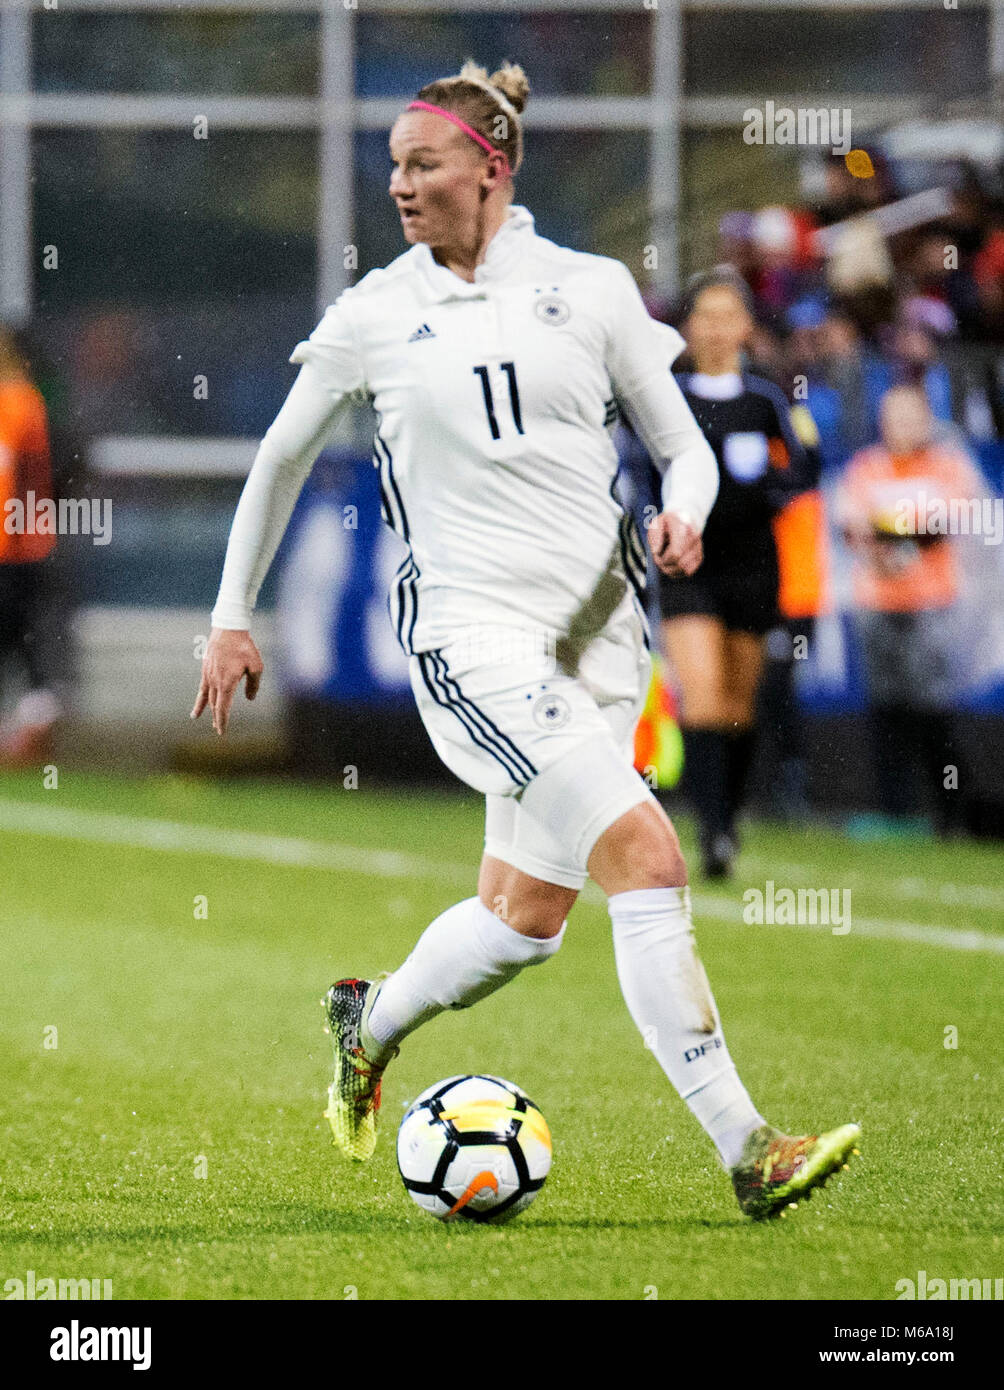 Columbus, Ohio, USA. March 1, 2018: Germany forward Alexandra Popp (11) handles the ball against the USA during their match at the SheBelieves Cup in Columbus, Ohio, USA. Brent Clark/Alamy Live  News Stock Photo